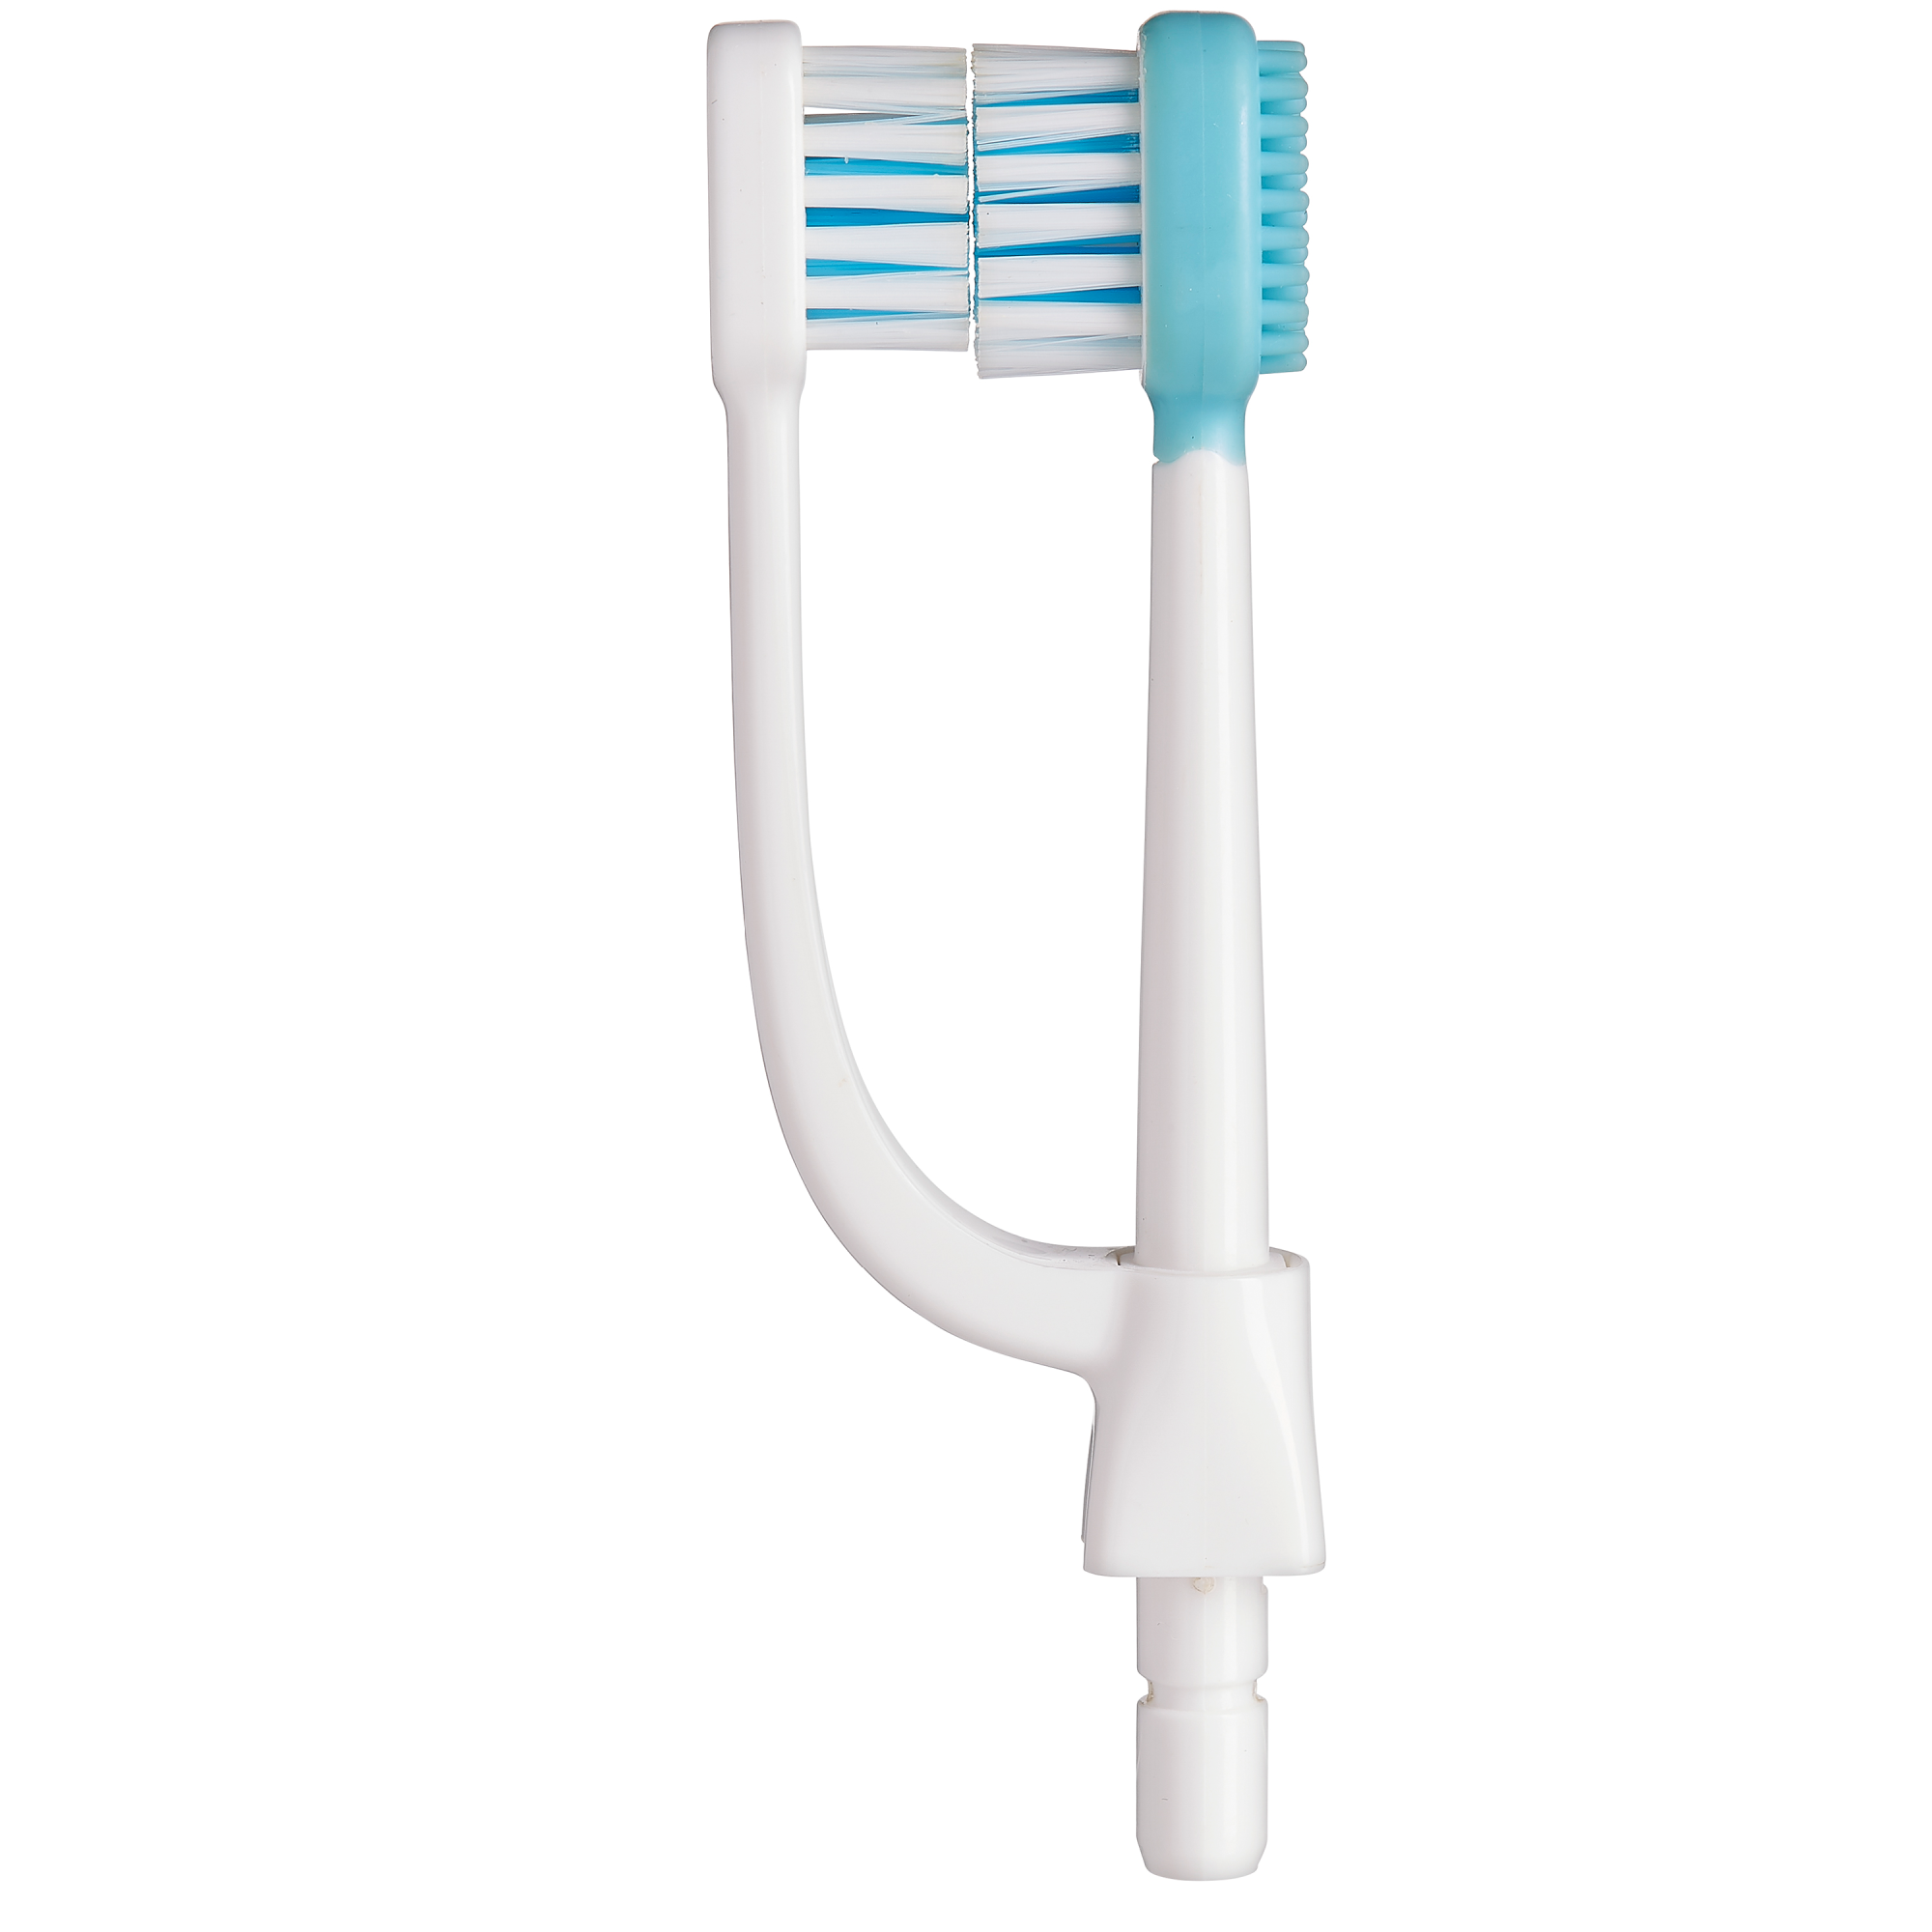 White, two headed toothbrush that water flosses with water  floss and brush at the same time